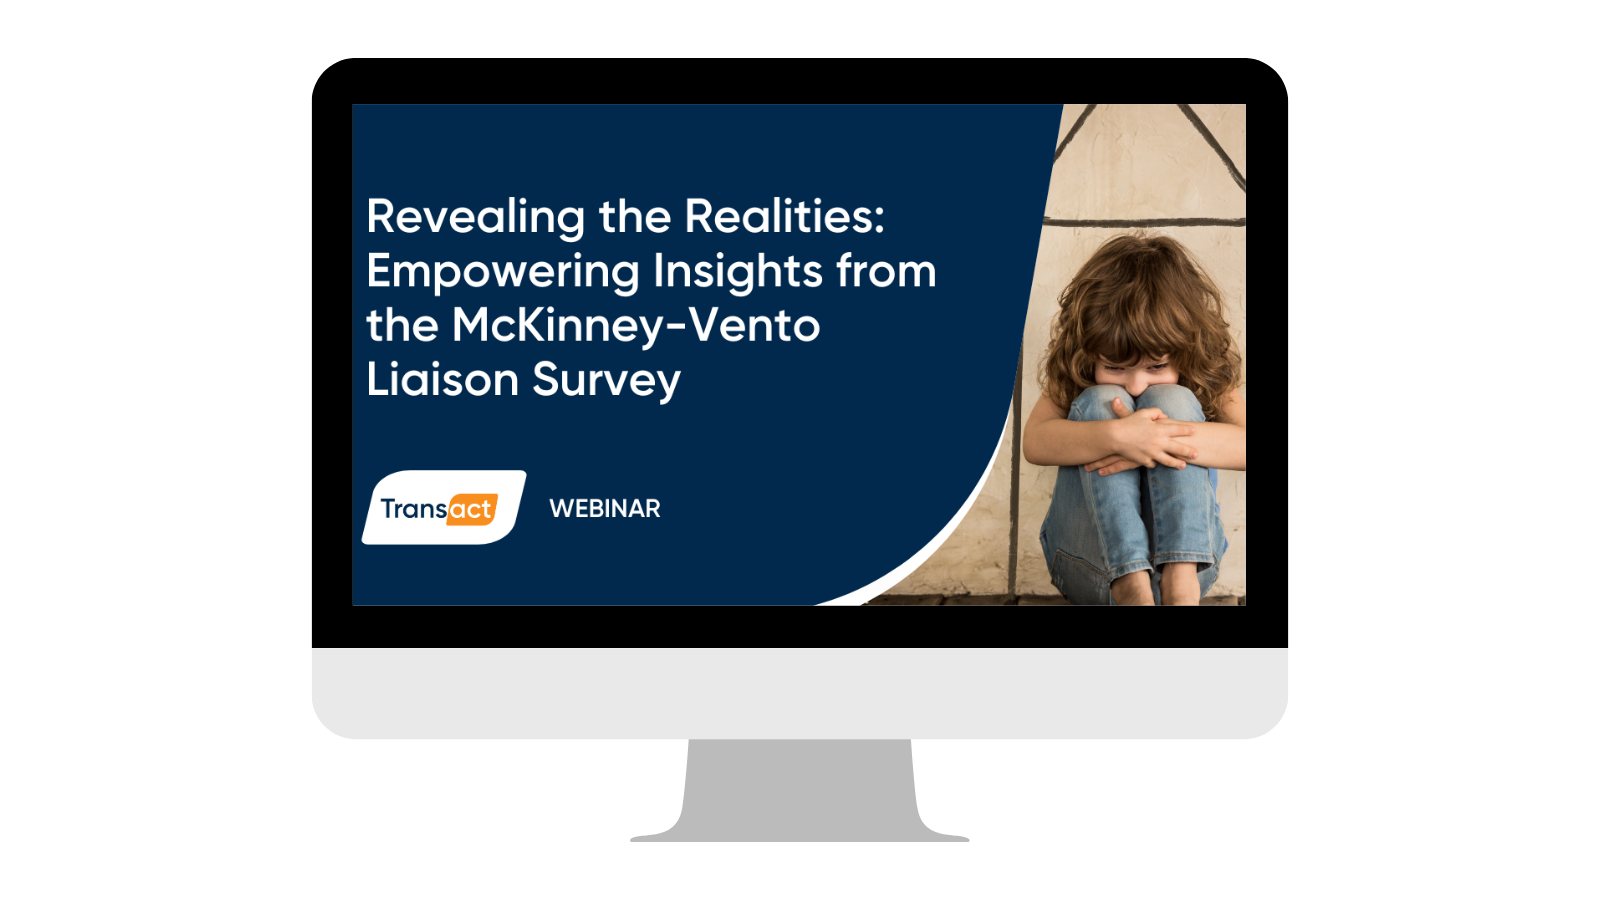 Empowering insights from Mckinney Vento Liaison Survey